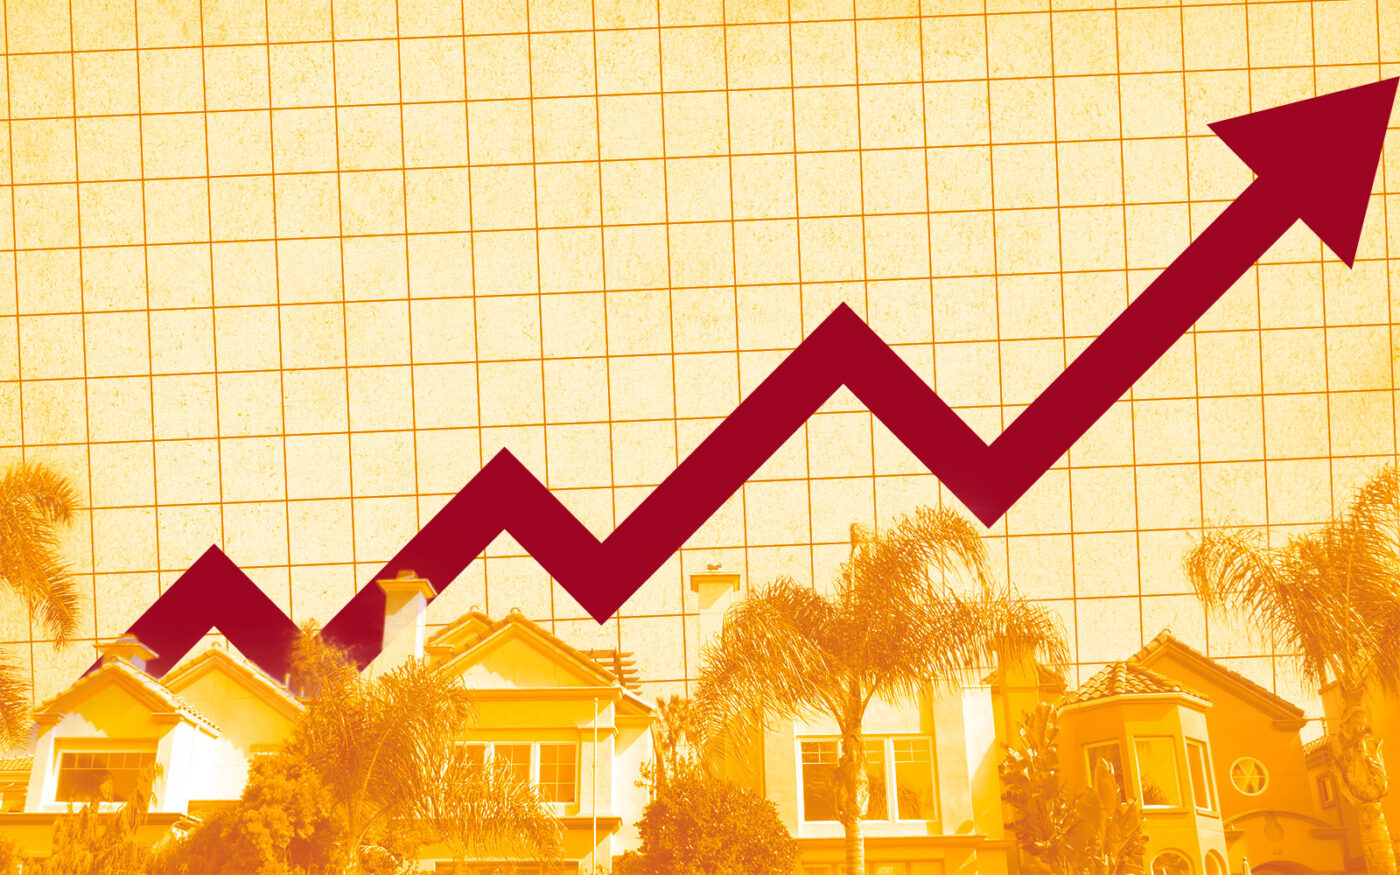 Southern California Home Sales Rise After Two-Year Slump